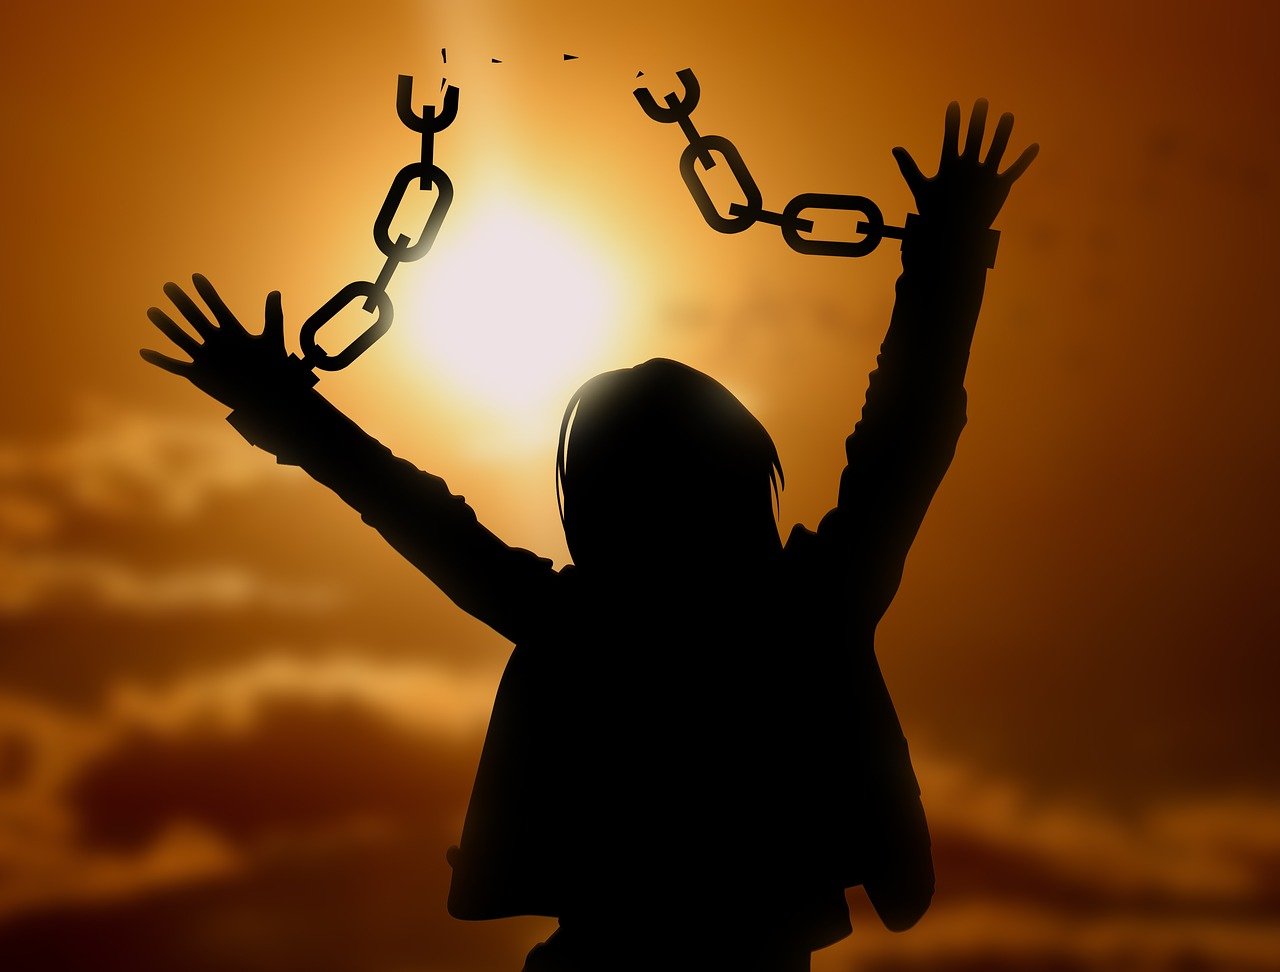 freedom from shackles